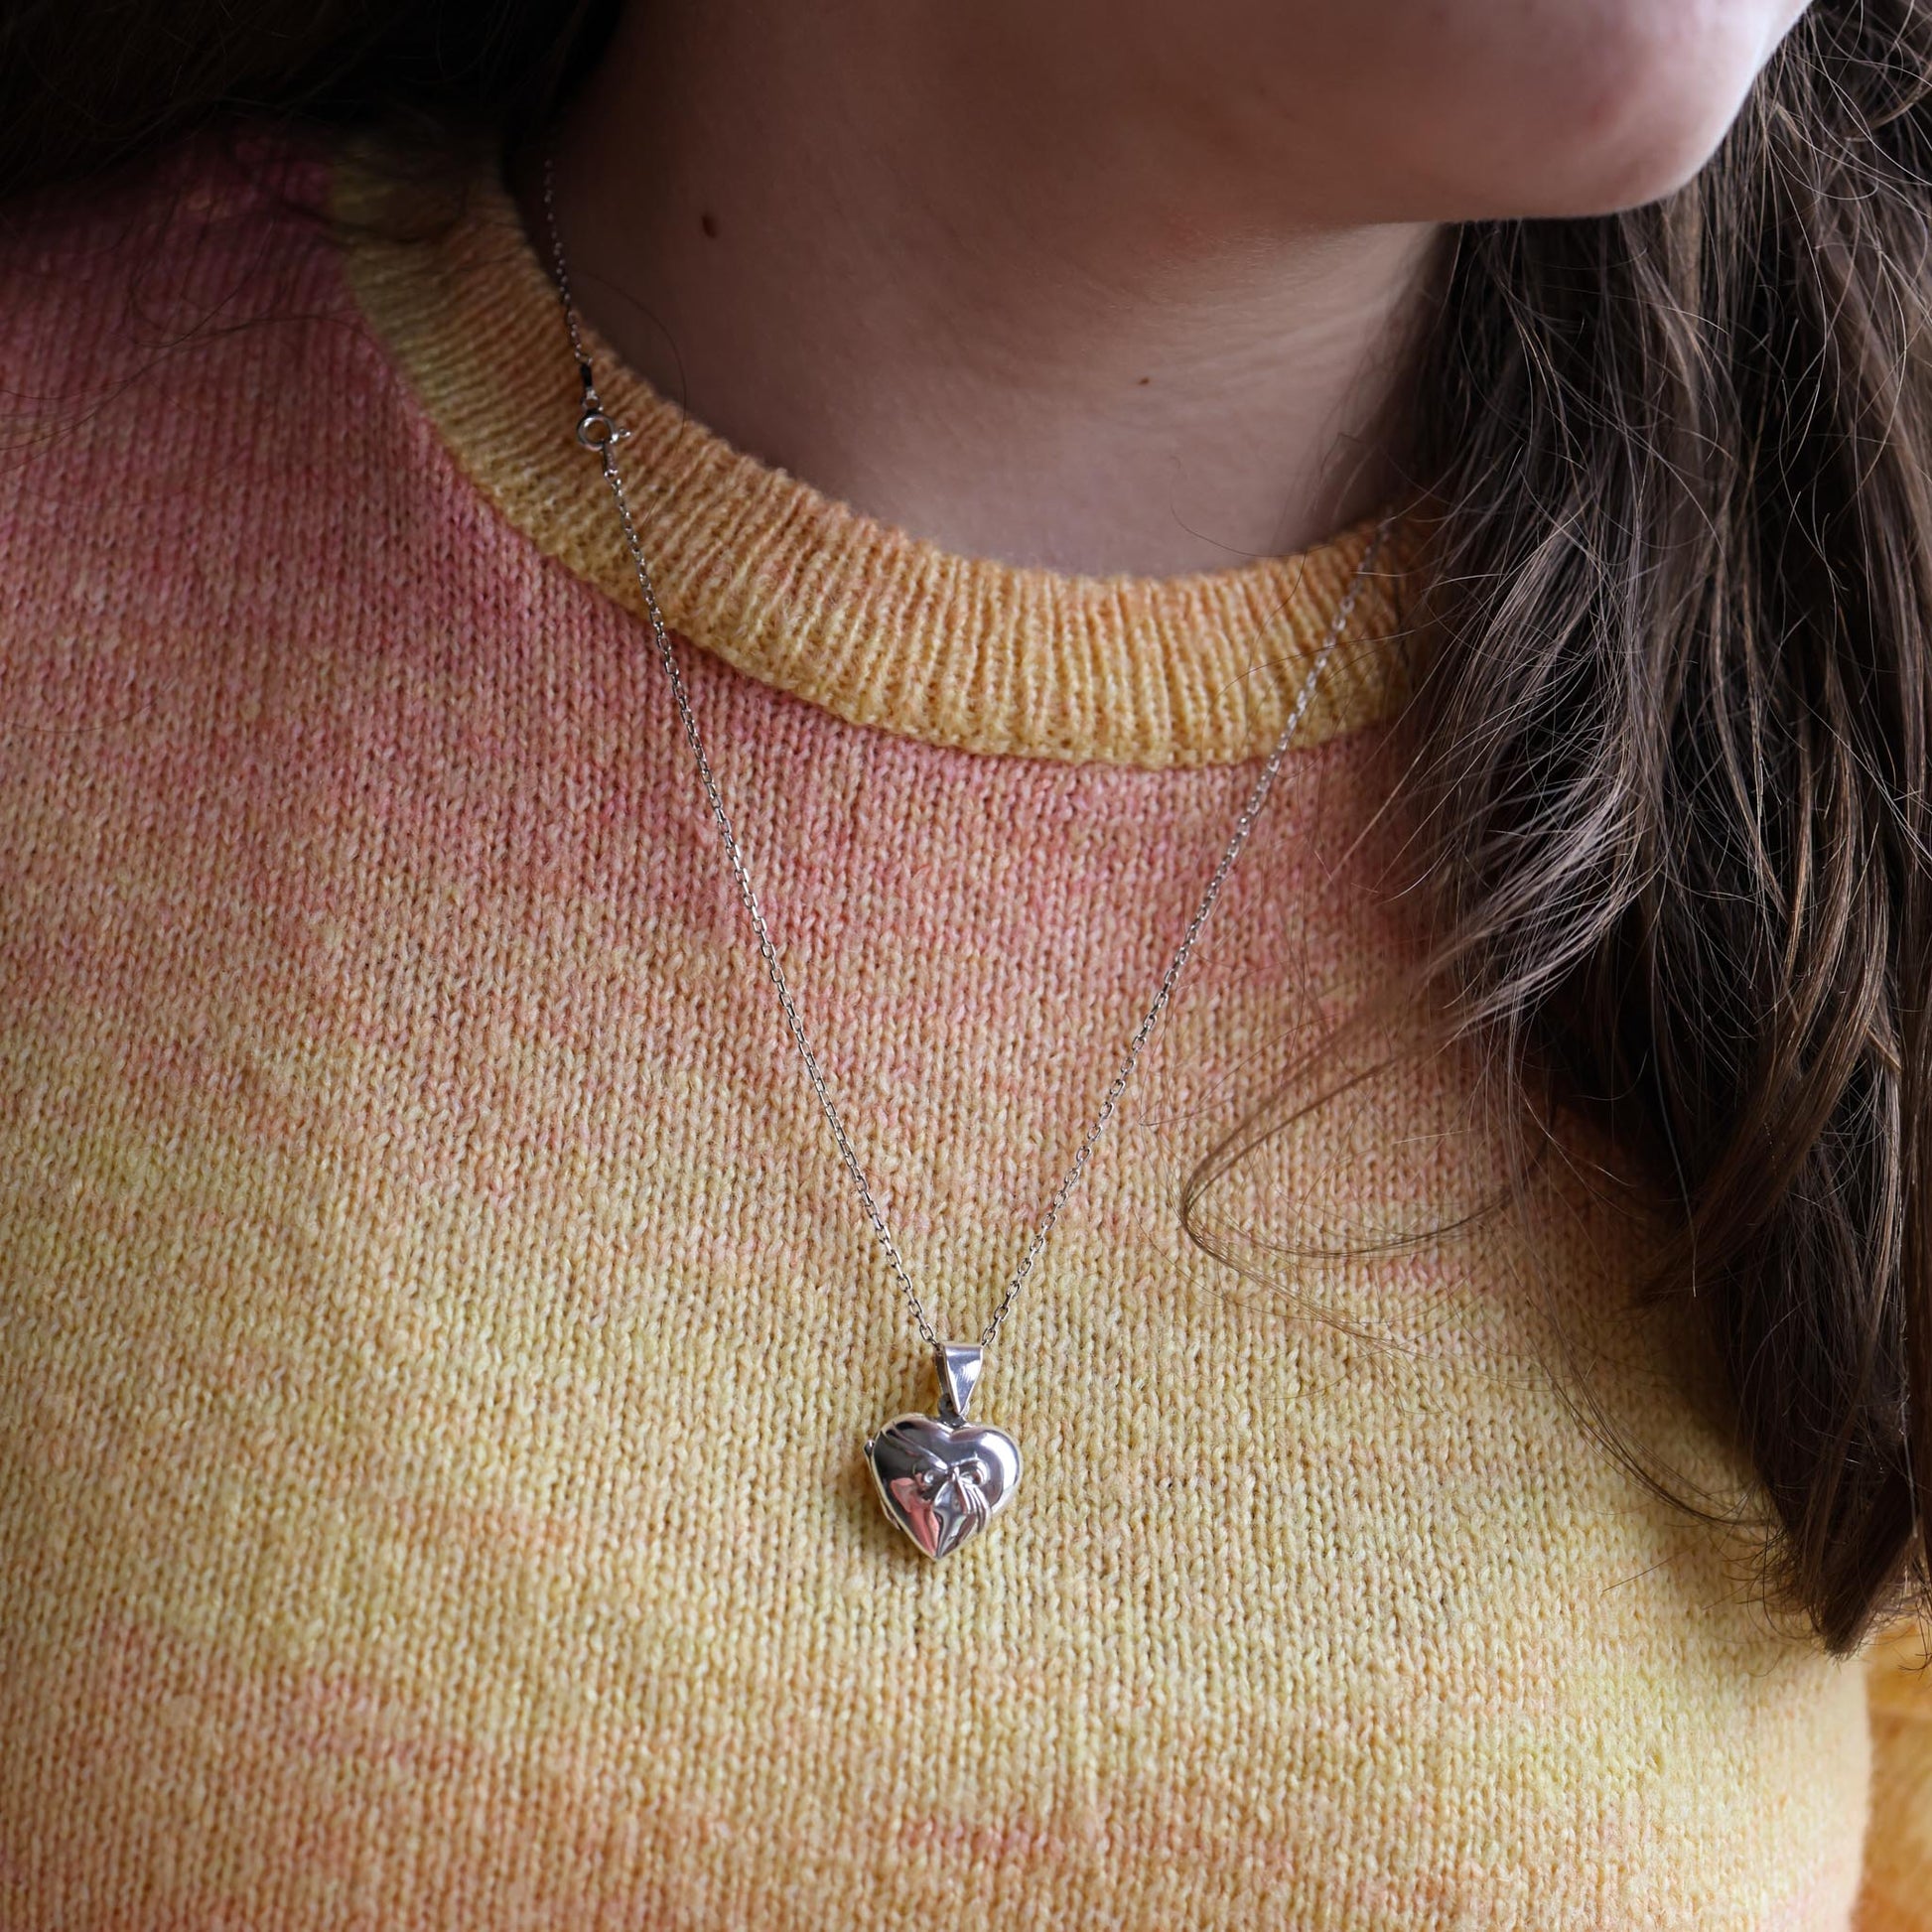 Child wearing a heart shaped locket with a bow embellishment wearing an orange and pink sweater